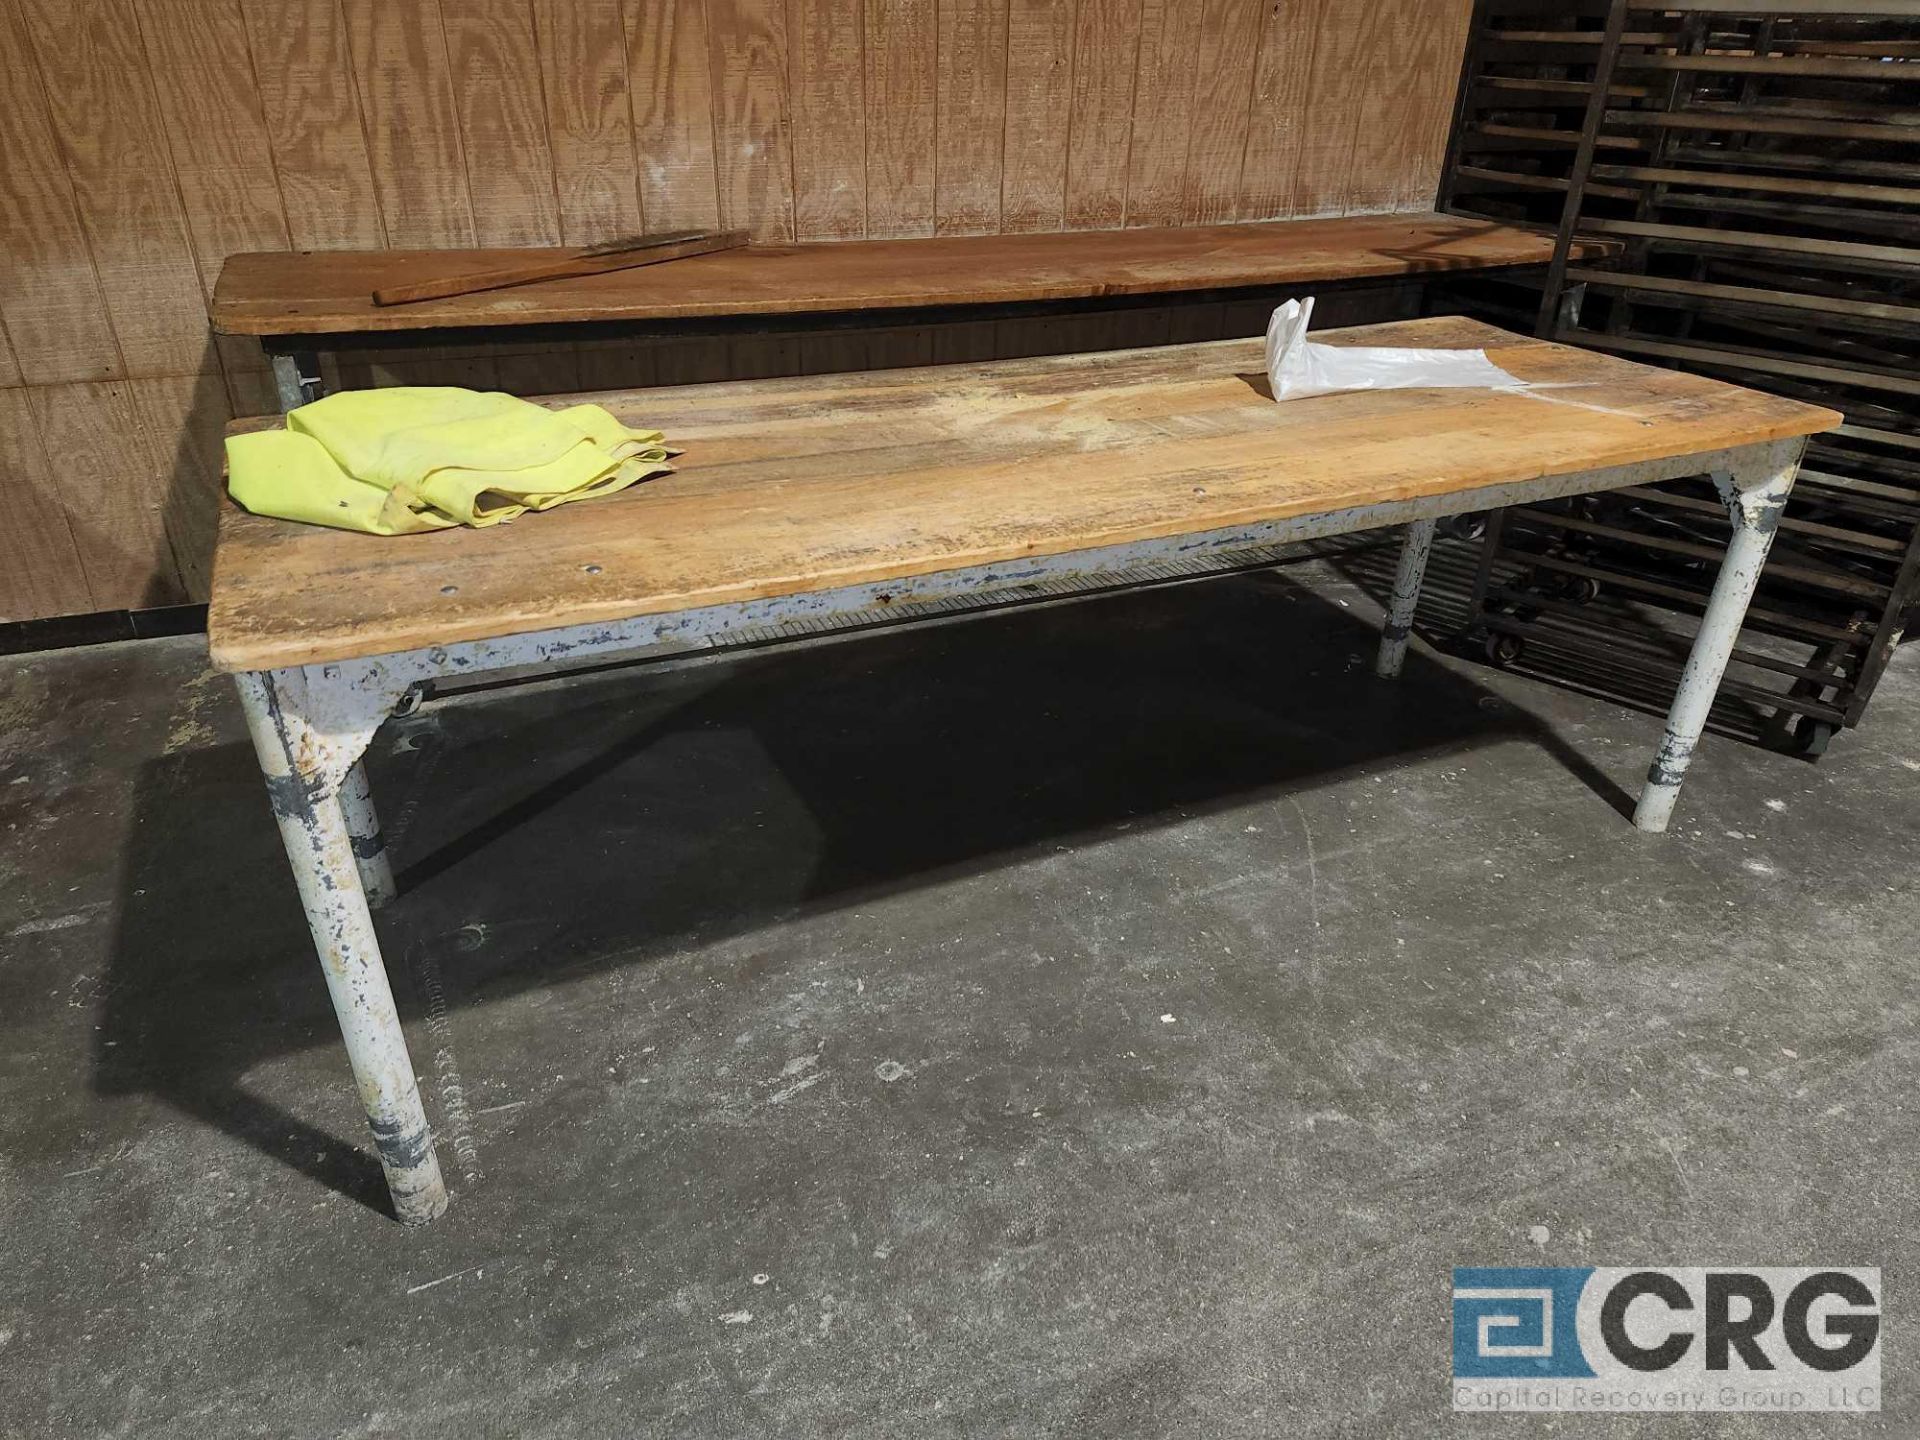 7 ft steel frame work table with 1 inch wood top